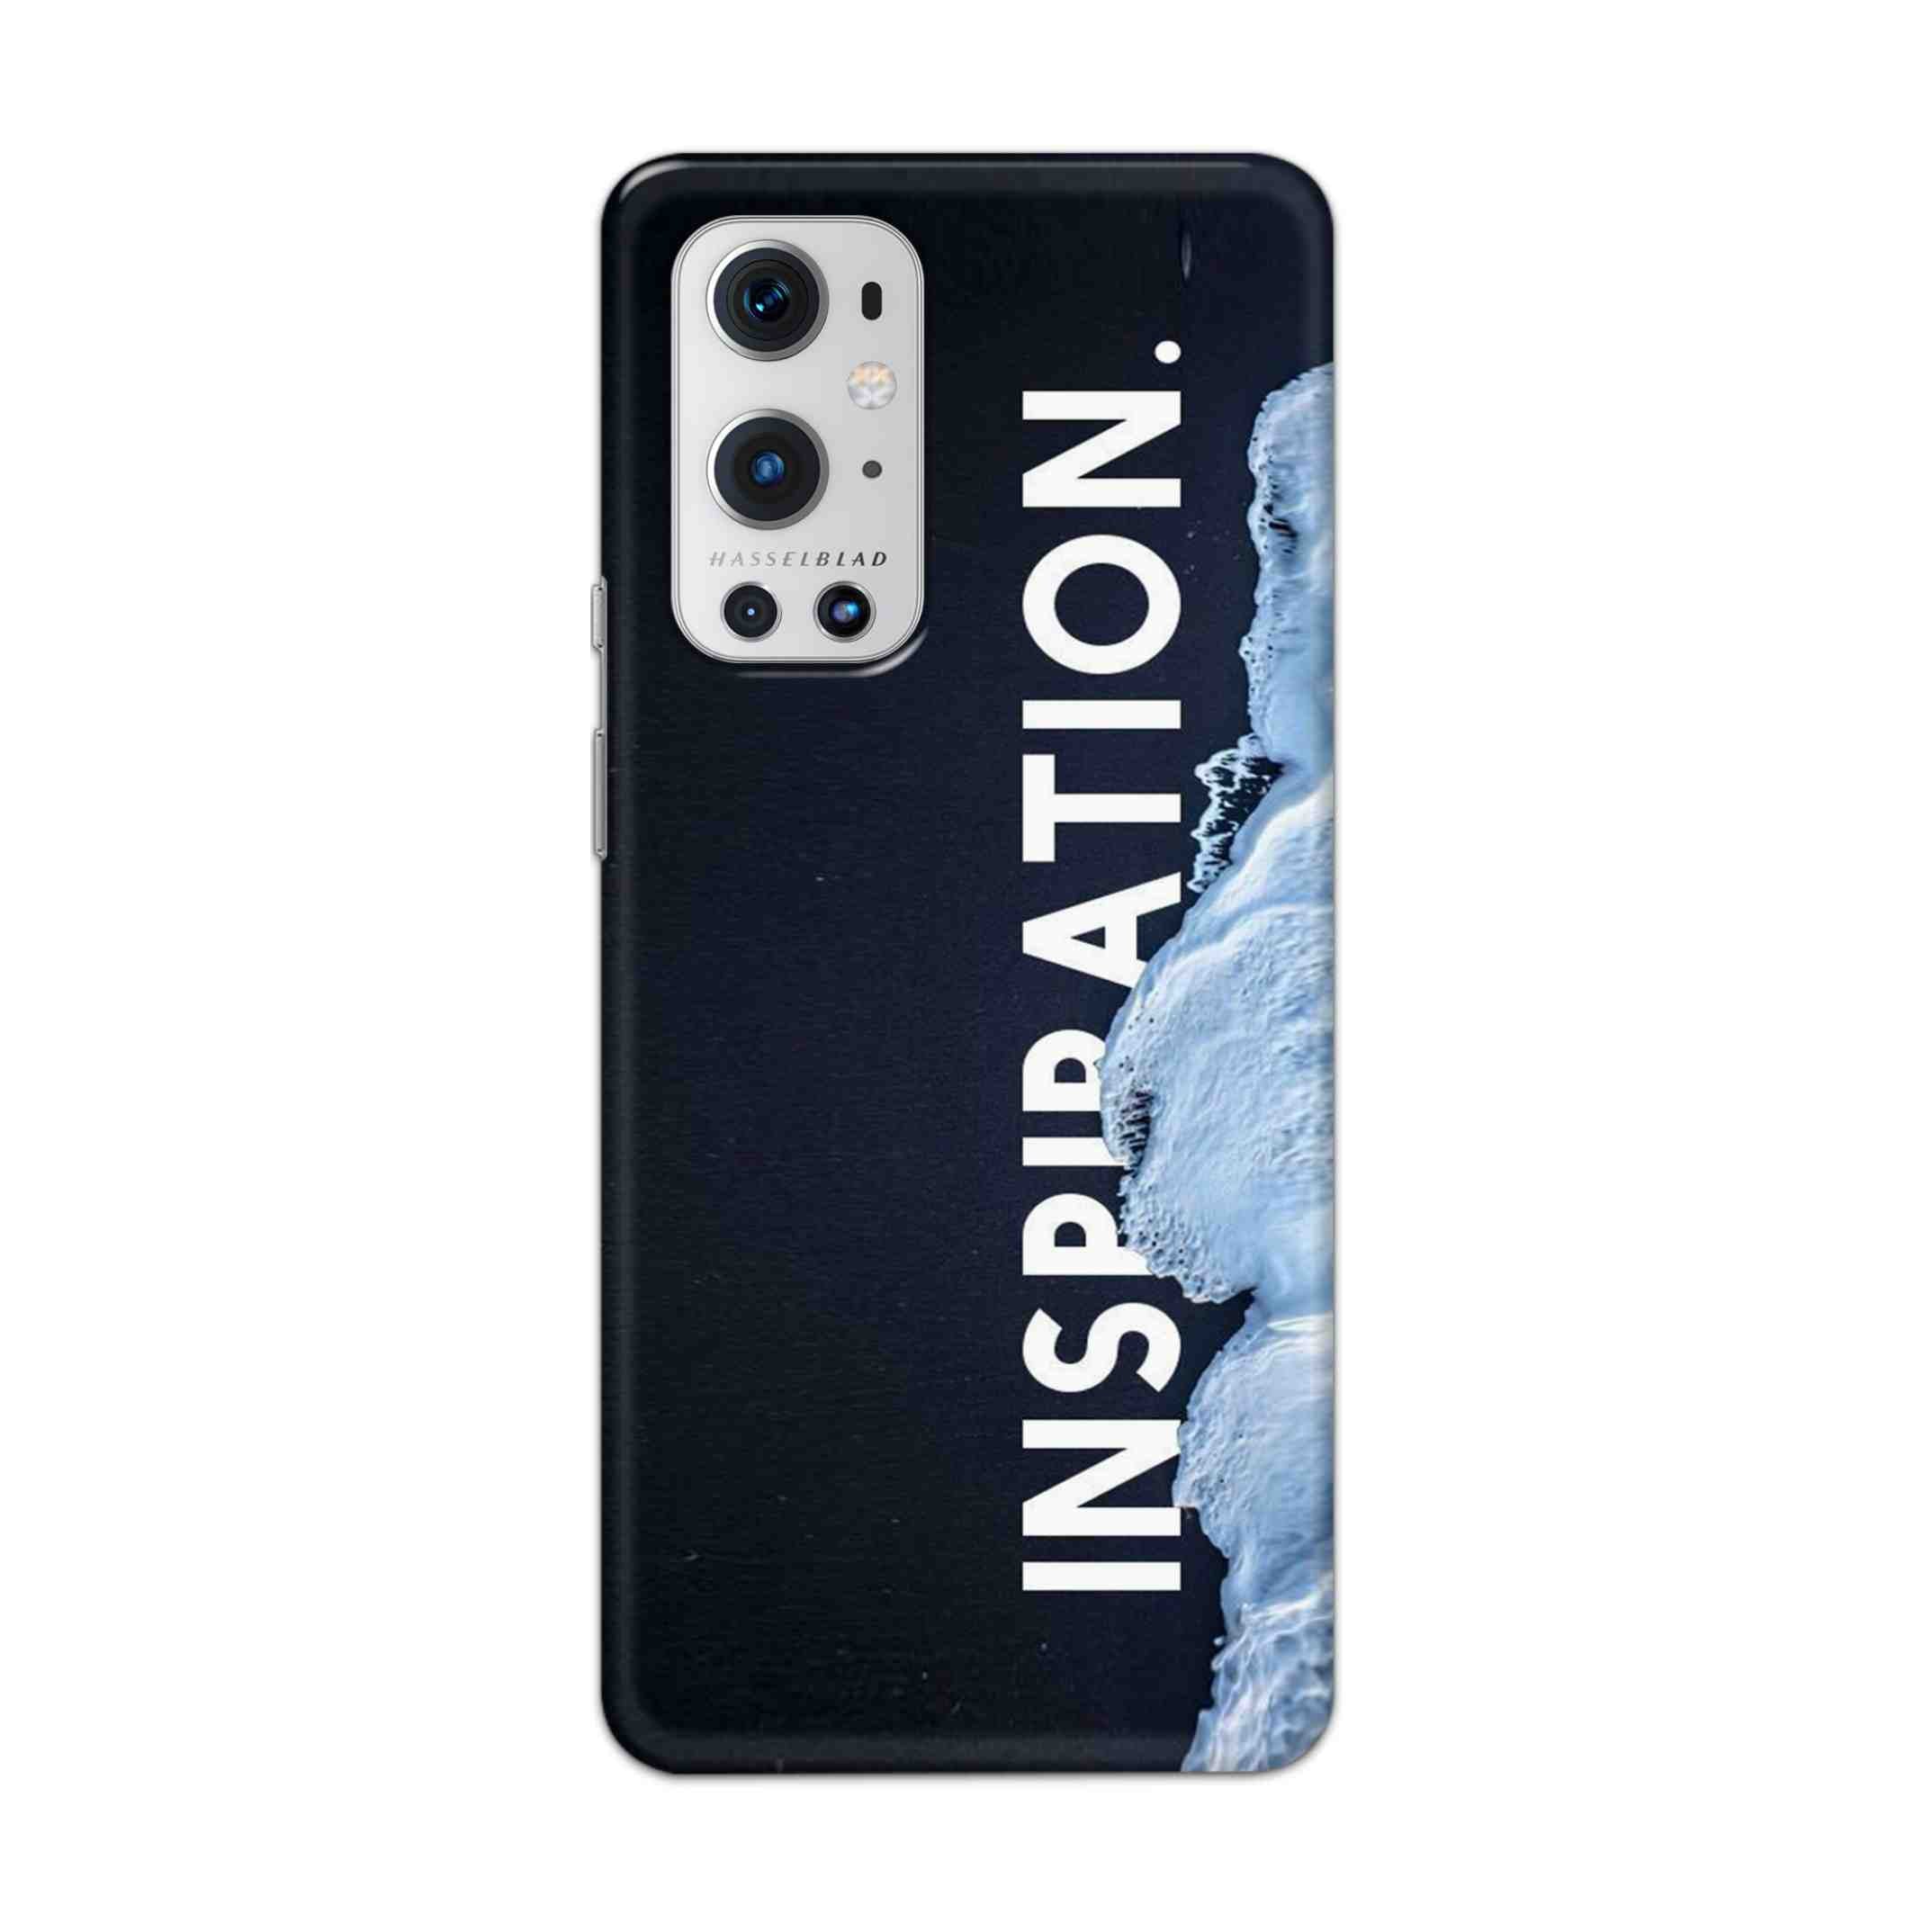 Buy Inspiration Hard Back Mobile Phone Case Cover For OnePlus 9 Pro Online